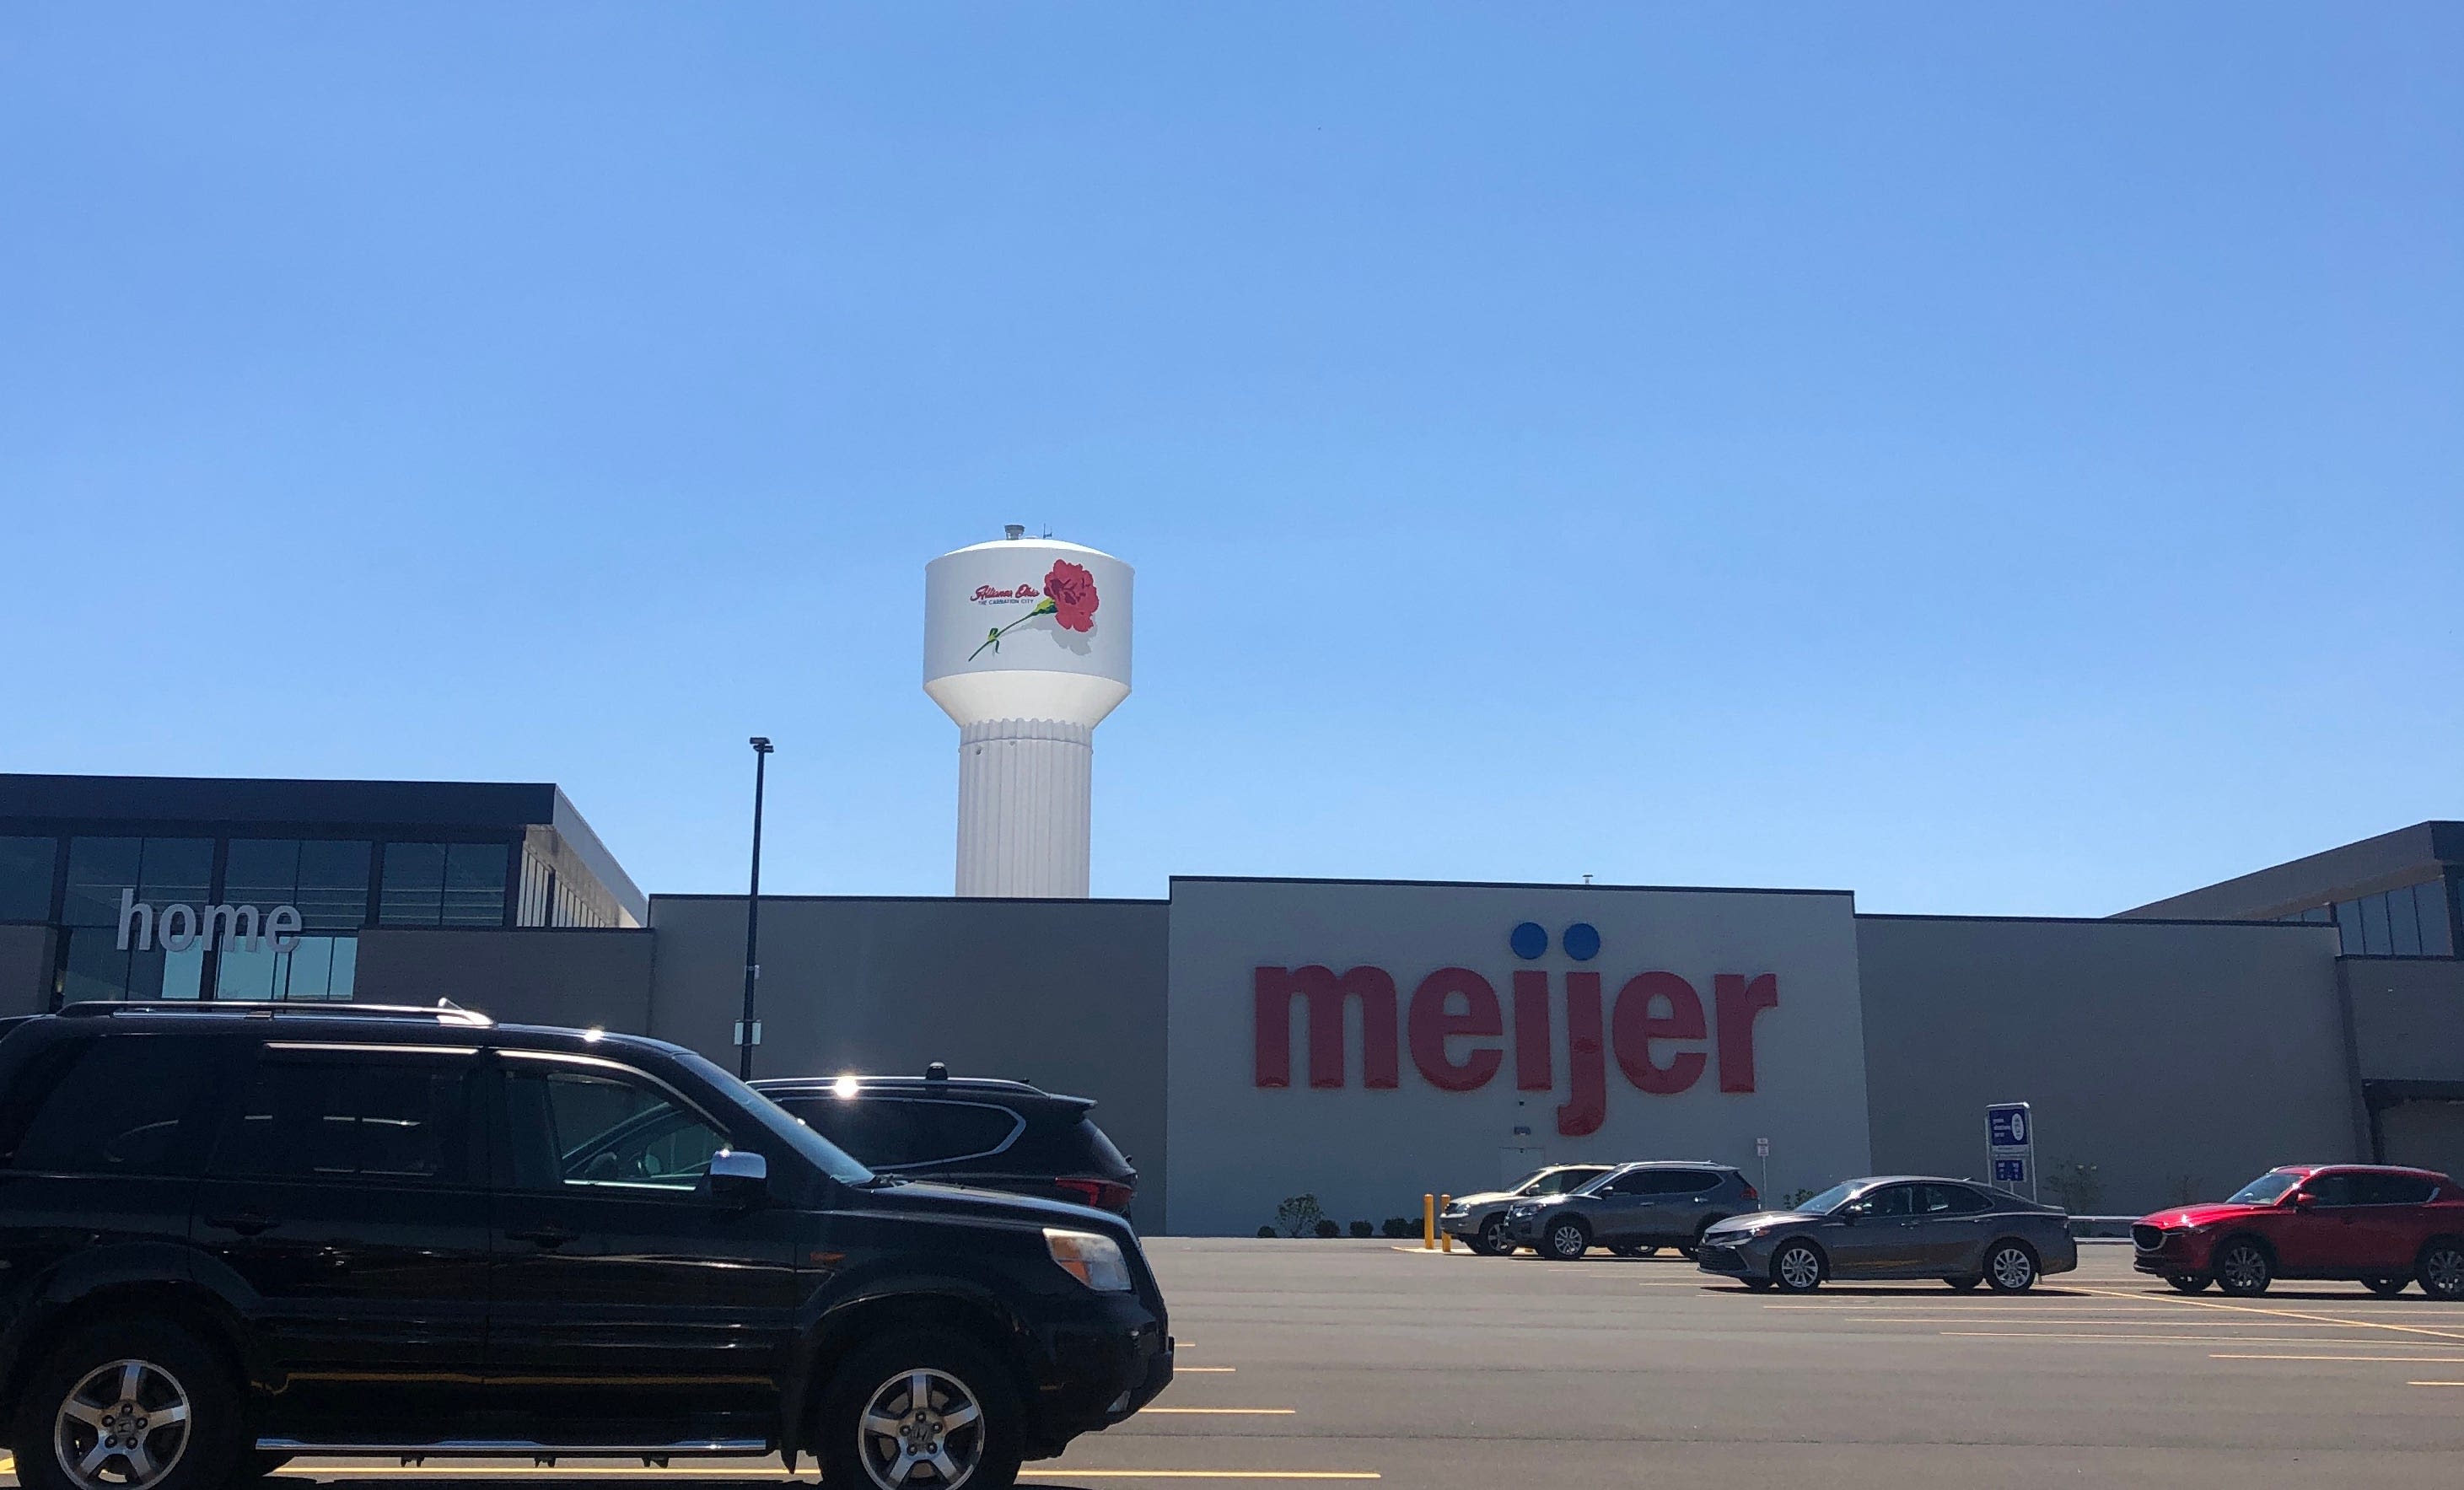 Meijer is ready to 'enrich lives' in the Alliance area, store manager says